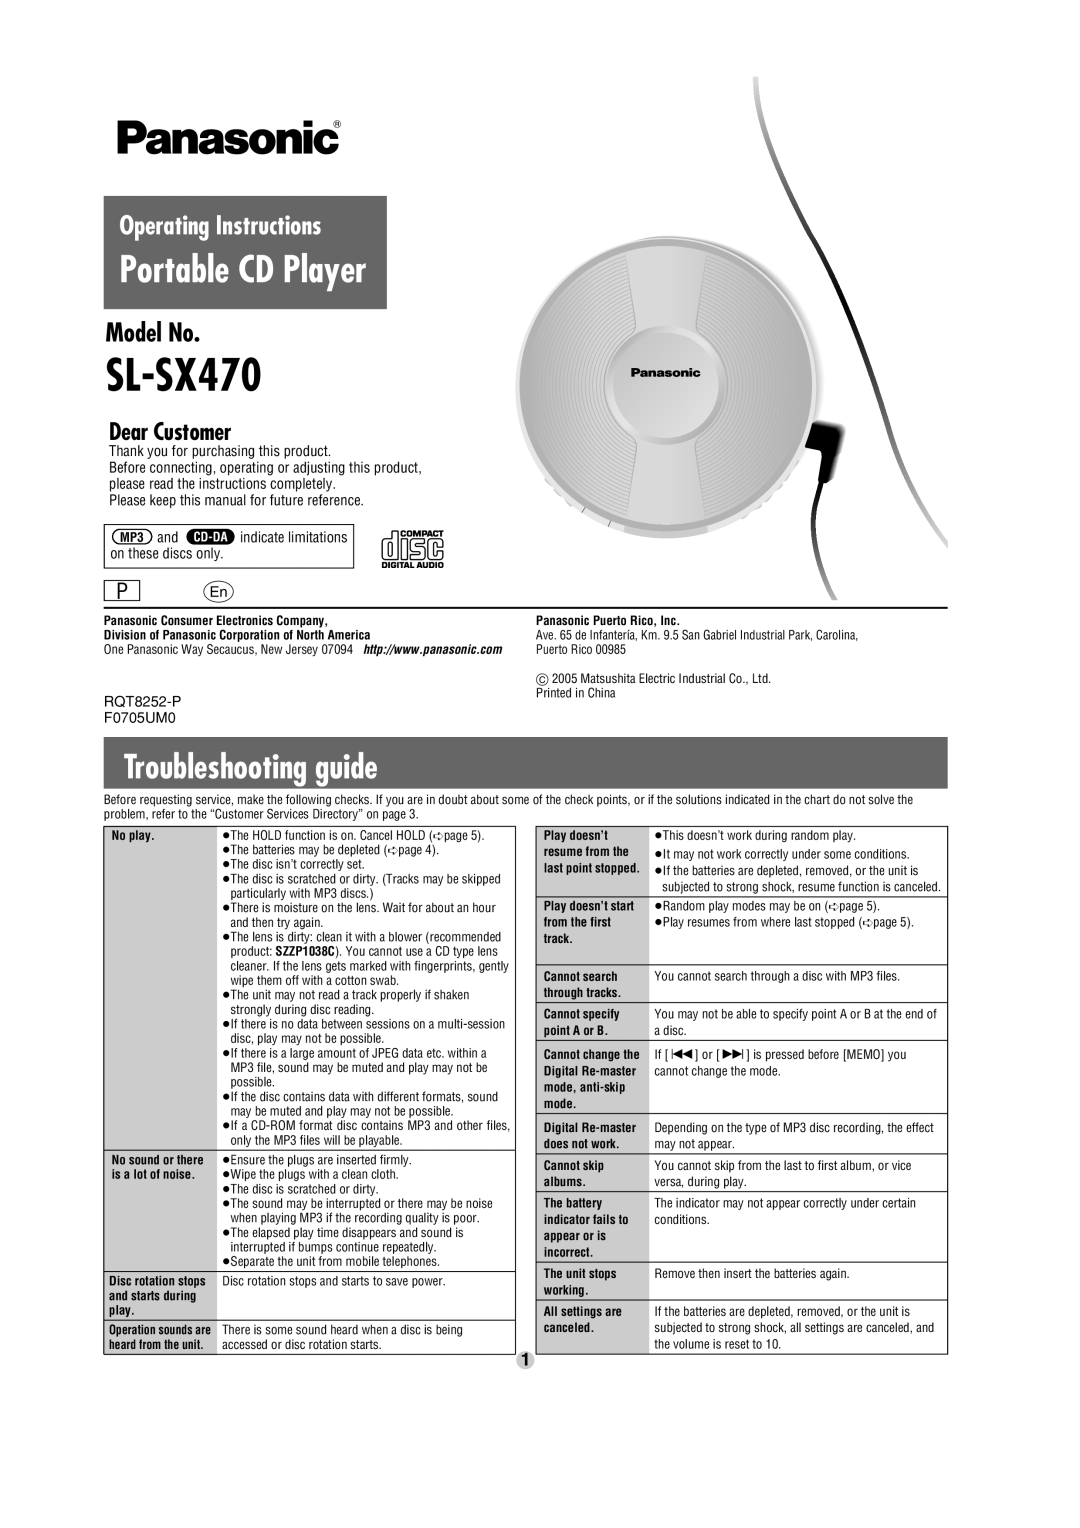 Panasonic SL-SX470 operating instructions Troubleshooting guide, Portable CD Player, Operating Instructions, Model No 